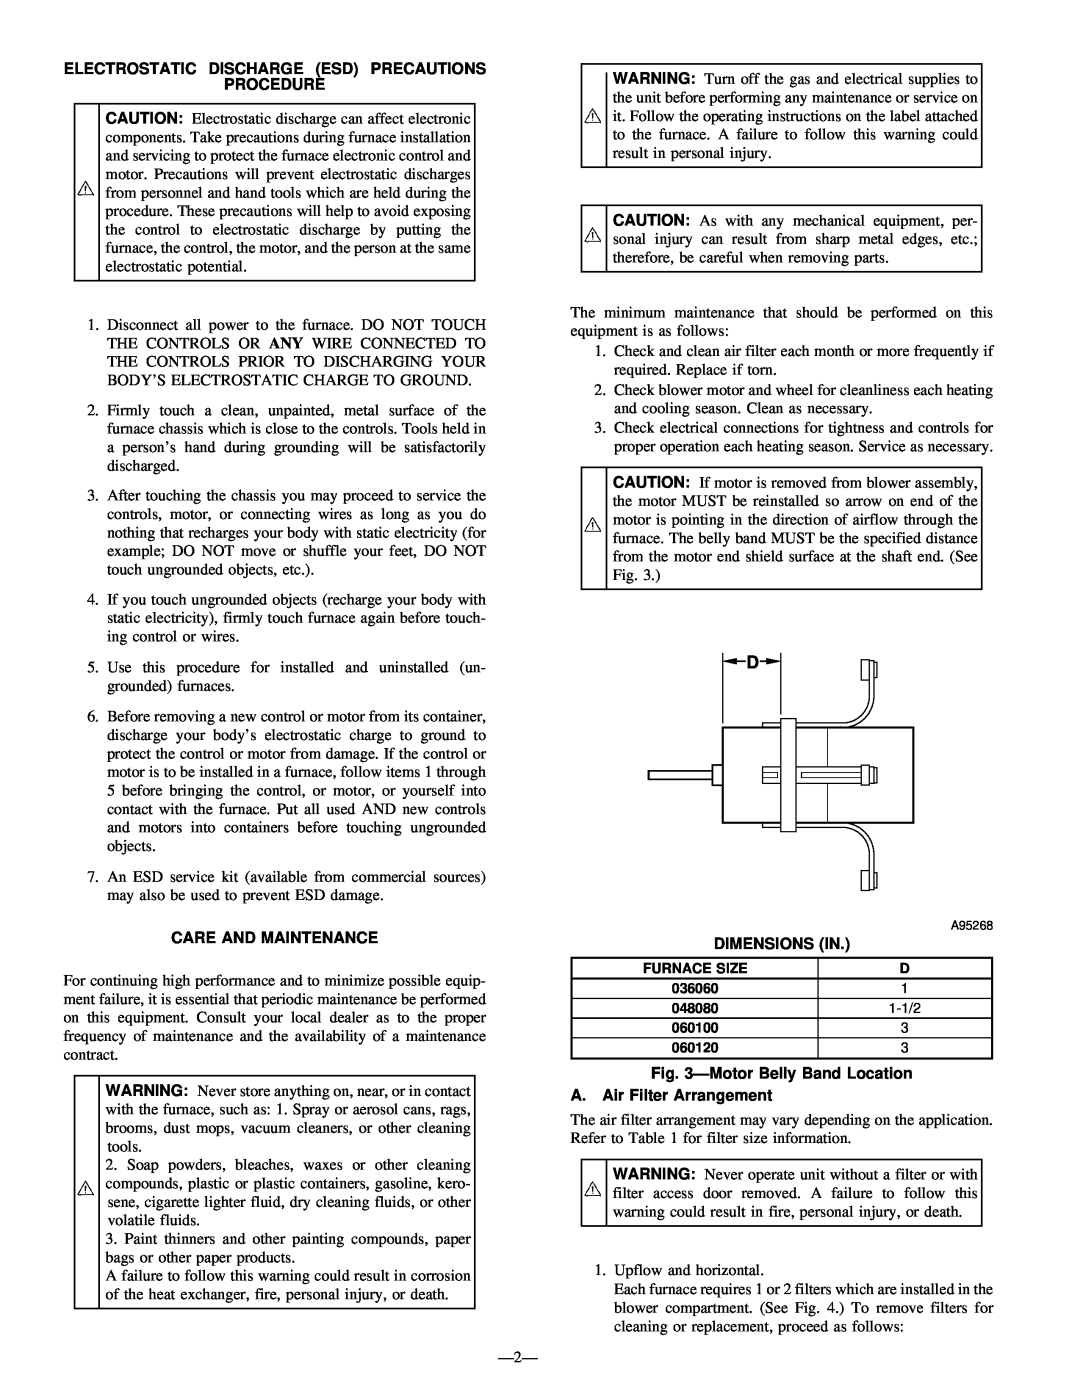 Bryant 333BAV instruction manual Electrostatic Discharge Esd Precautions Procedure, Care And Maintenance, Dimensions In 